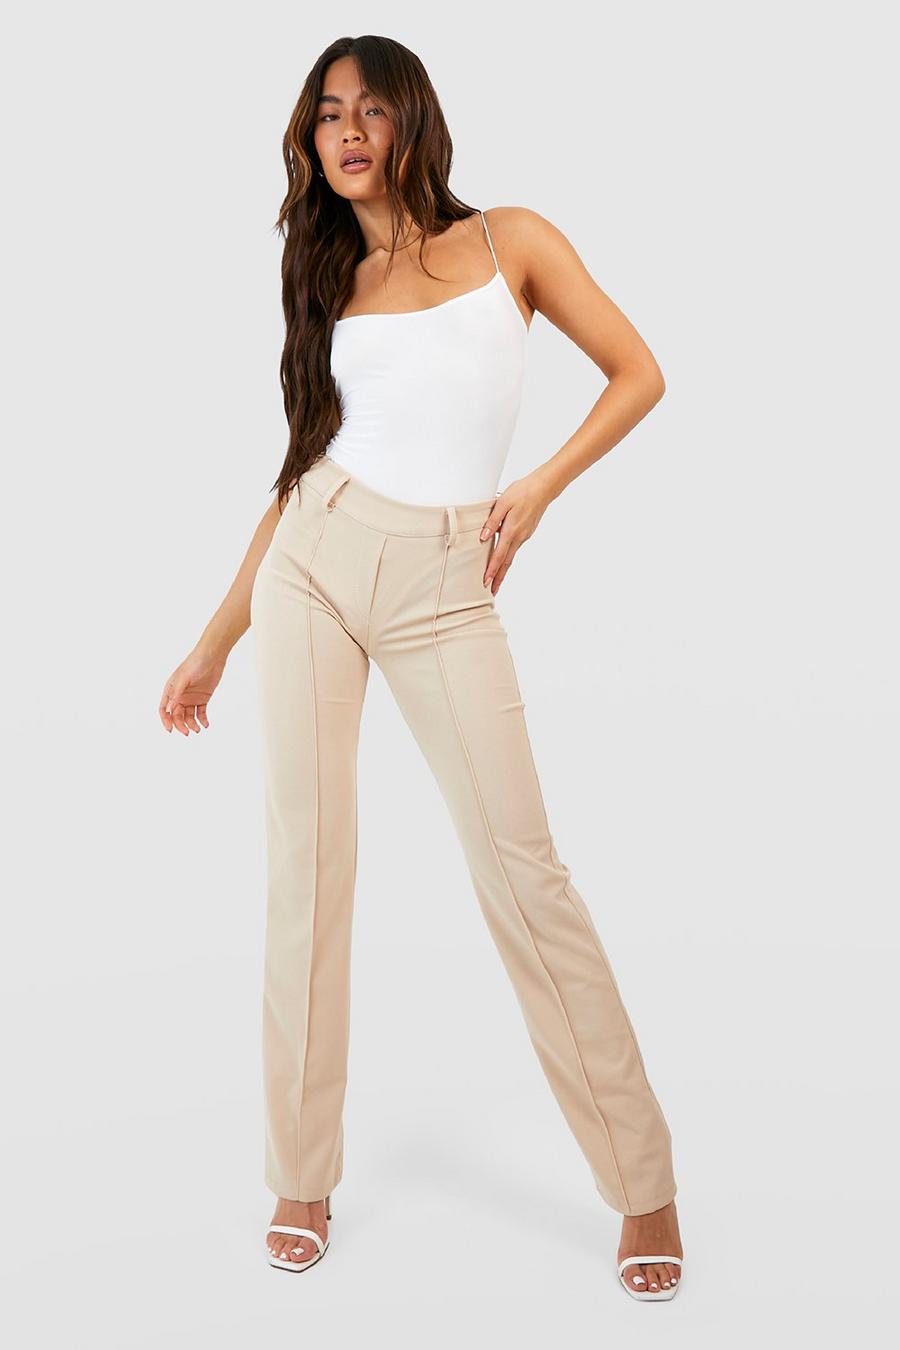 2023 Womens Stretch Boyfriend High Waisted Skinny Jeans Straight Leg Skinny  Black Pants With Hip Capris And Push Up Feature From Crosslery, $37.93